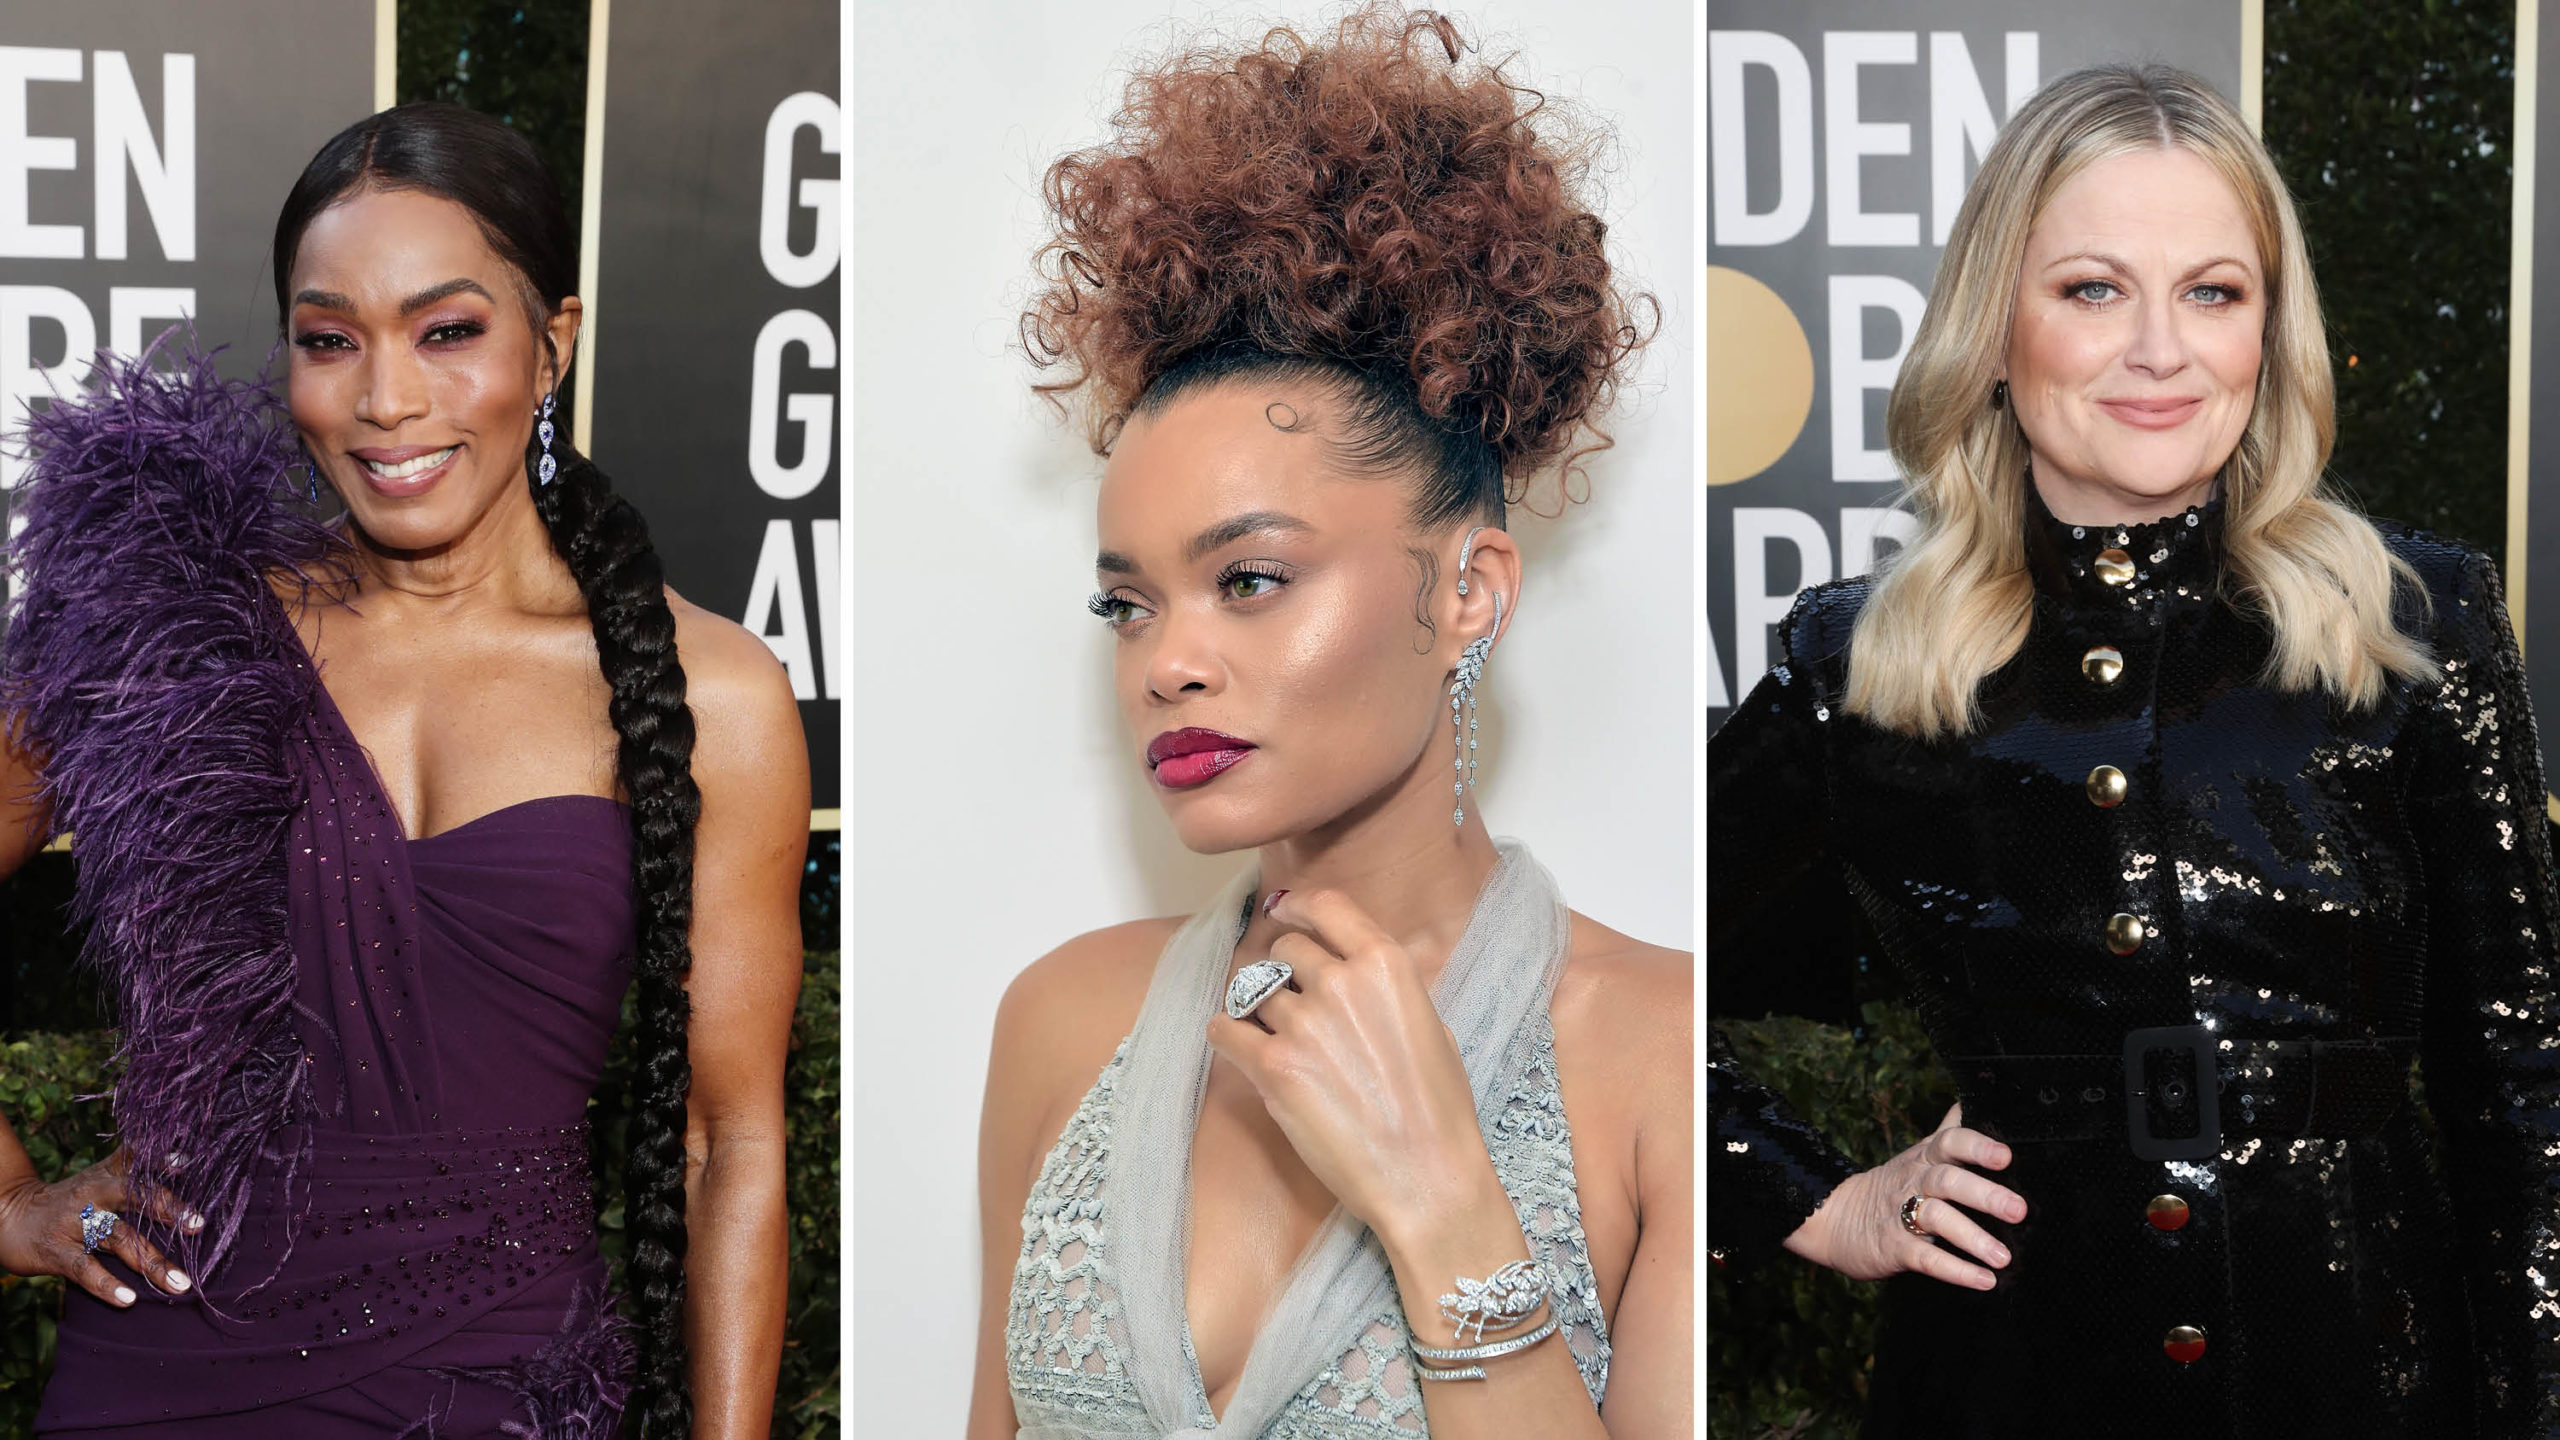 Our Favorite Hair and Makeup Looks at the 2021 Golden Globe Awards